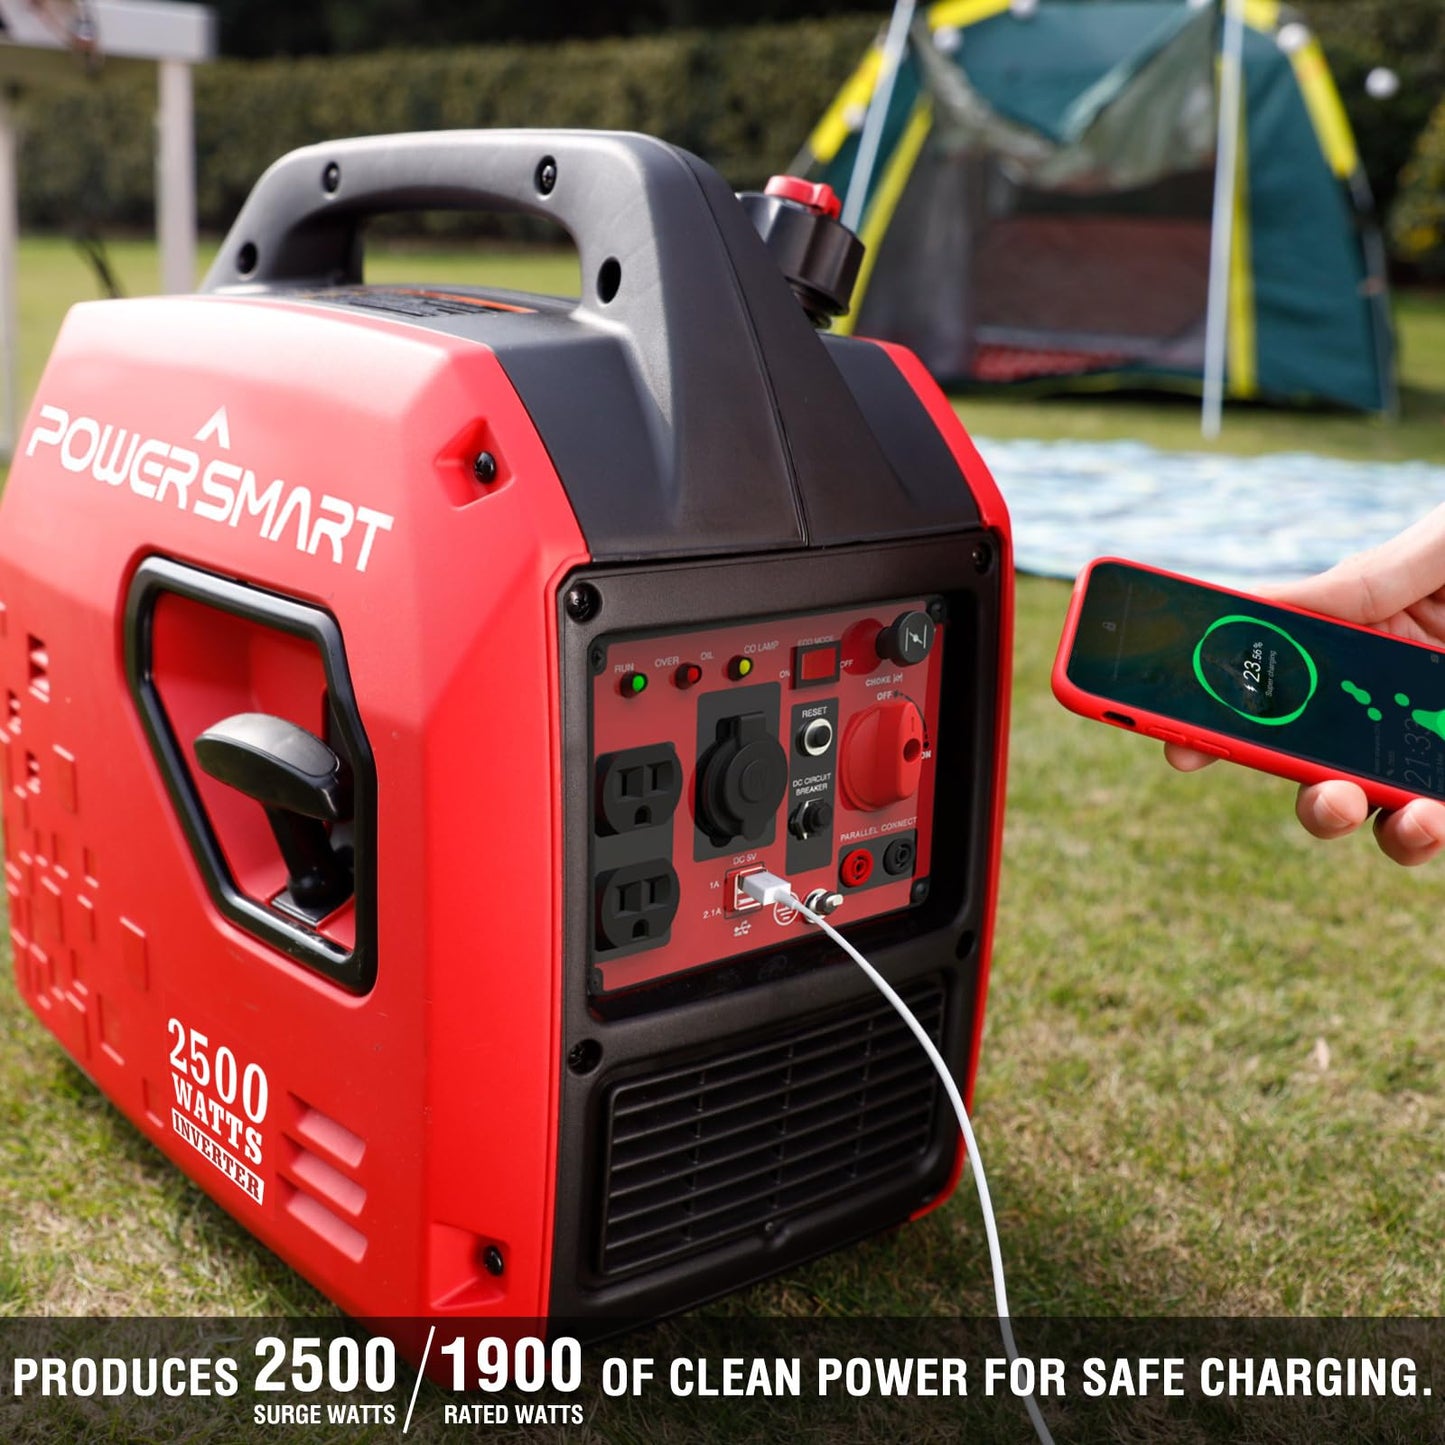 PowerSmart 2500-Watt Portable Inverter Generator, Super Quiet Gas Powered Generator for Camping, Home Use, Outdoor, CARB Compliant 2500 Watts/Red